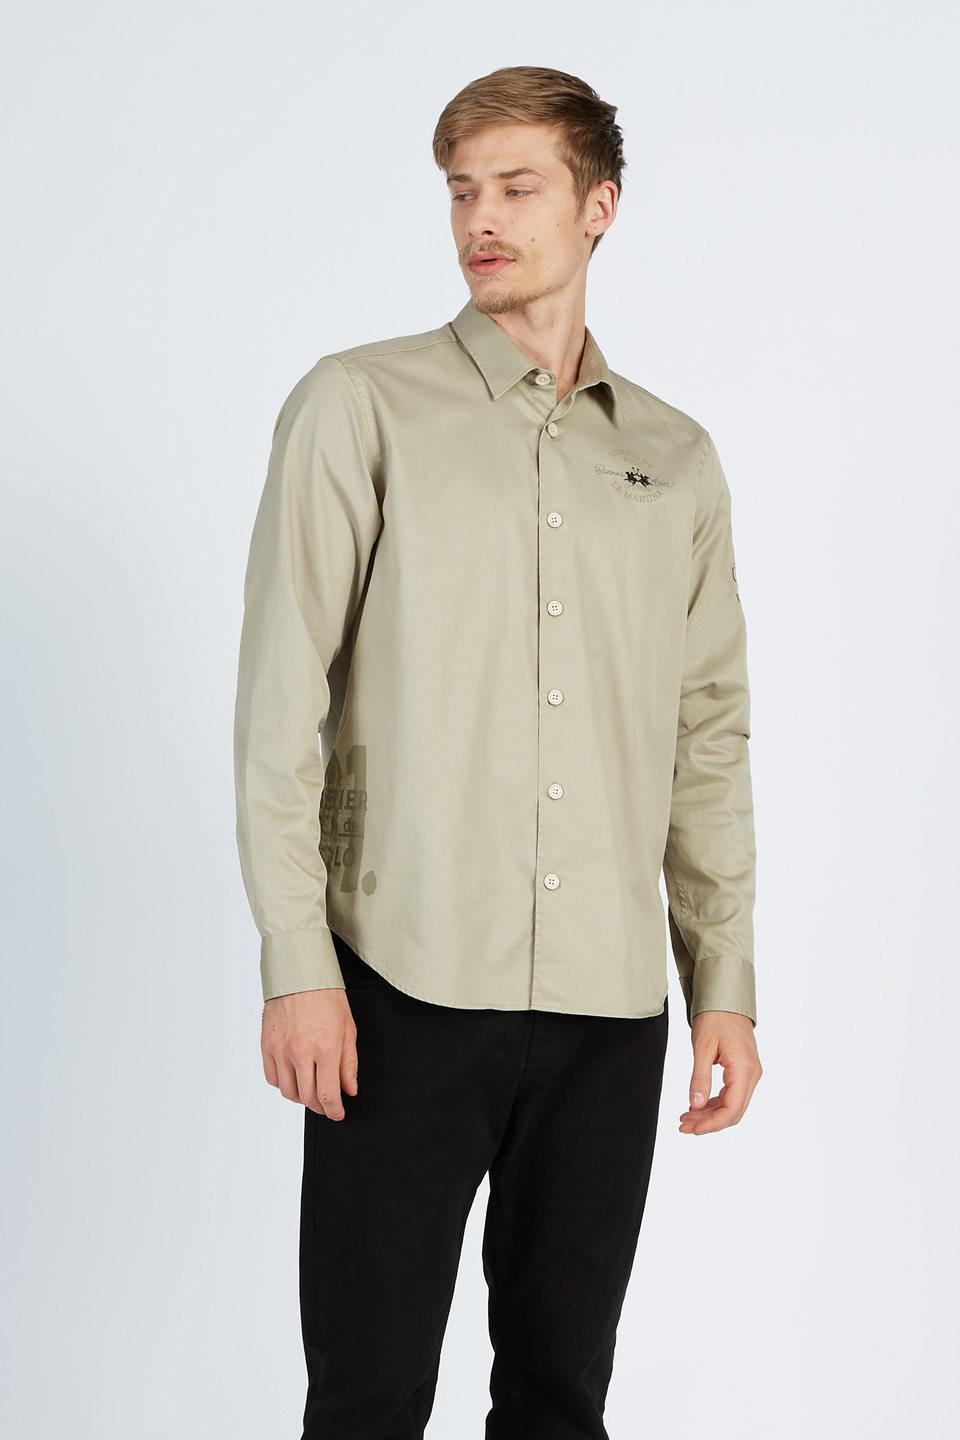 Leyendas Del Polo men’s shirt with long sleeves in regular fit twill cotton | La Martina - Official Online Shop